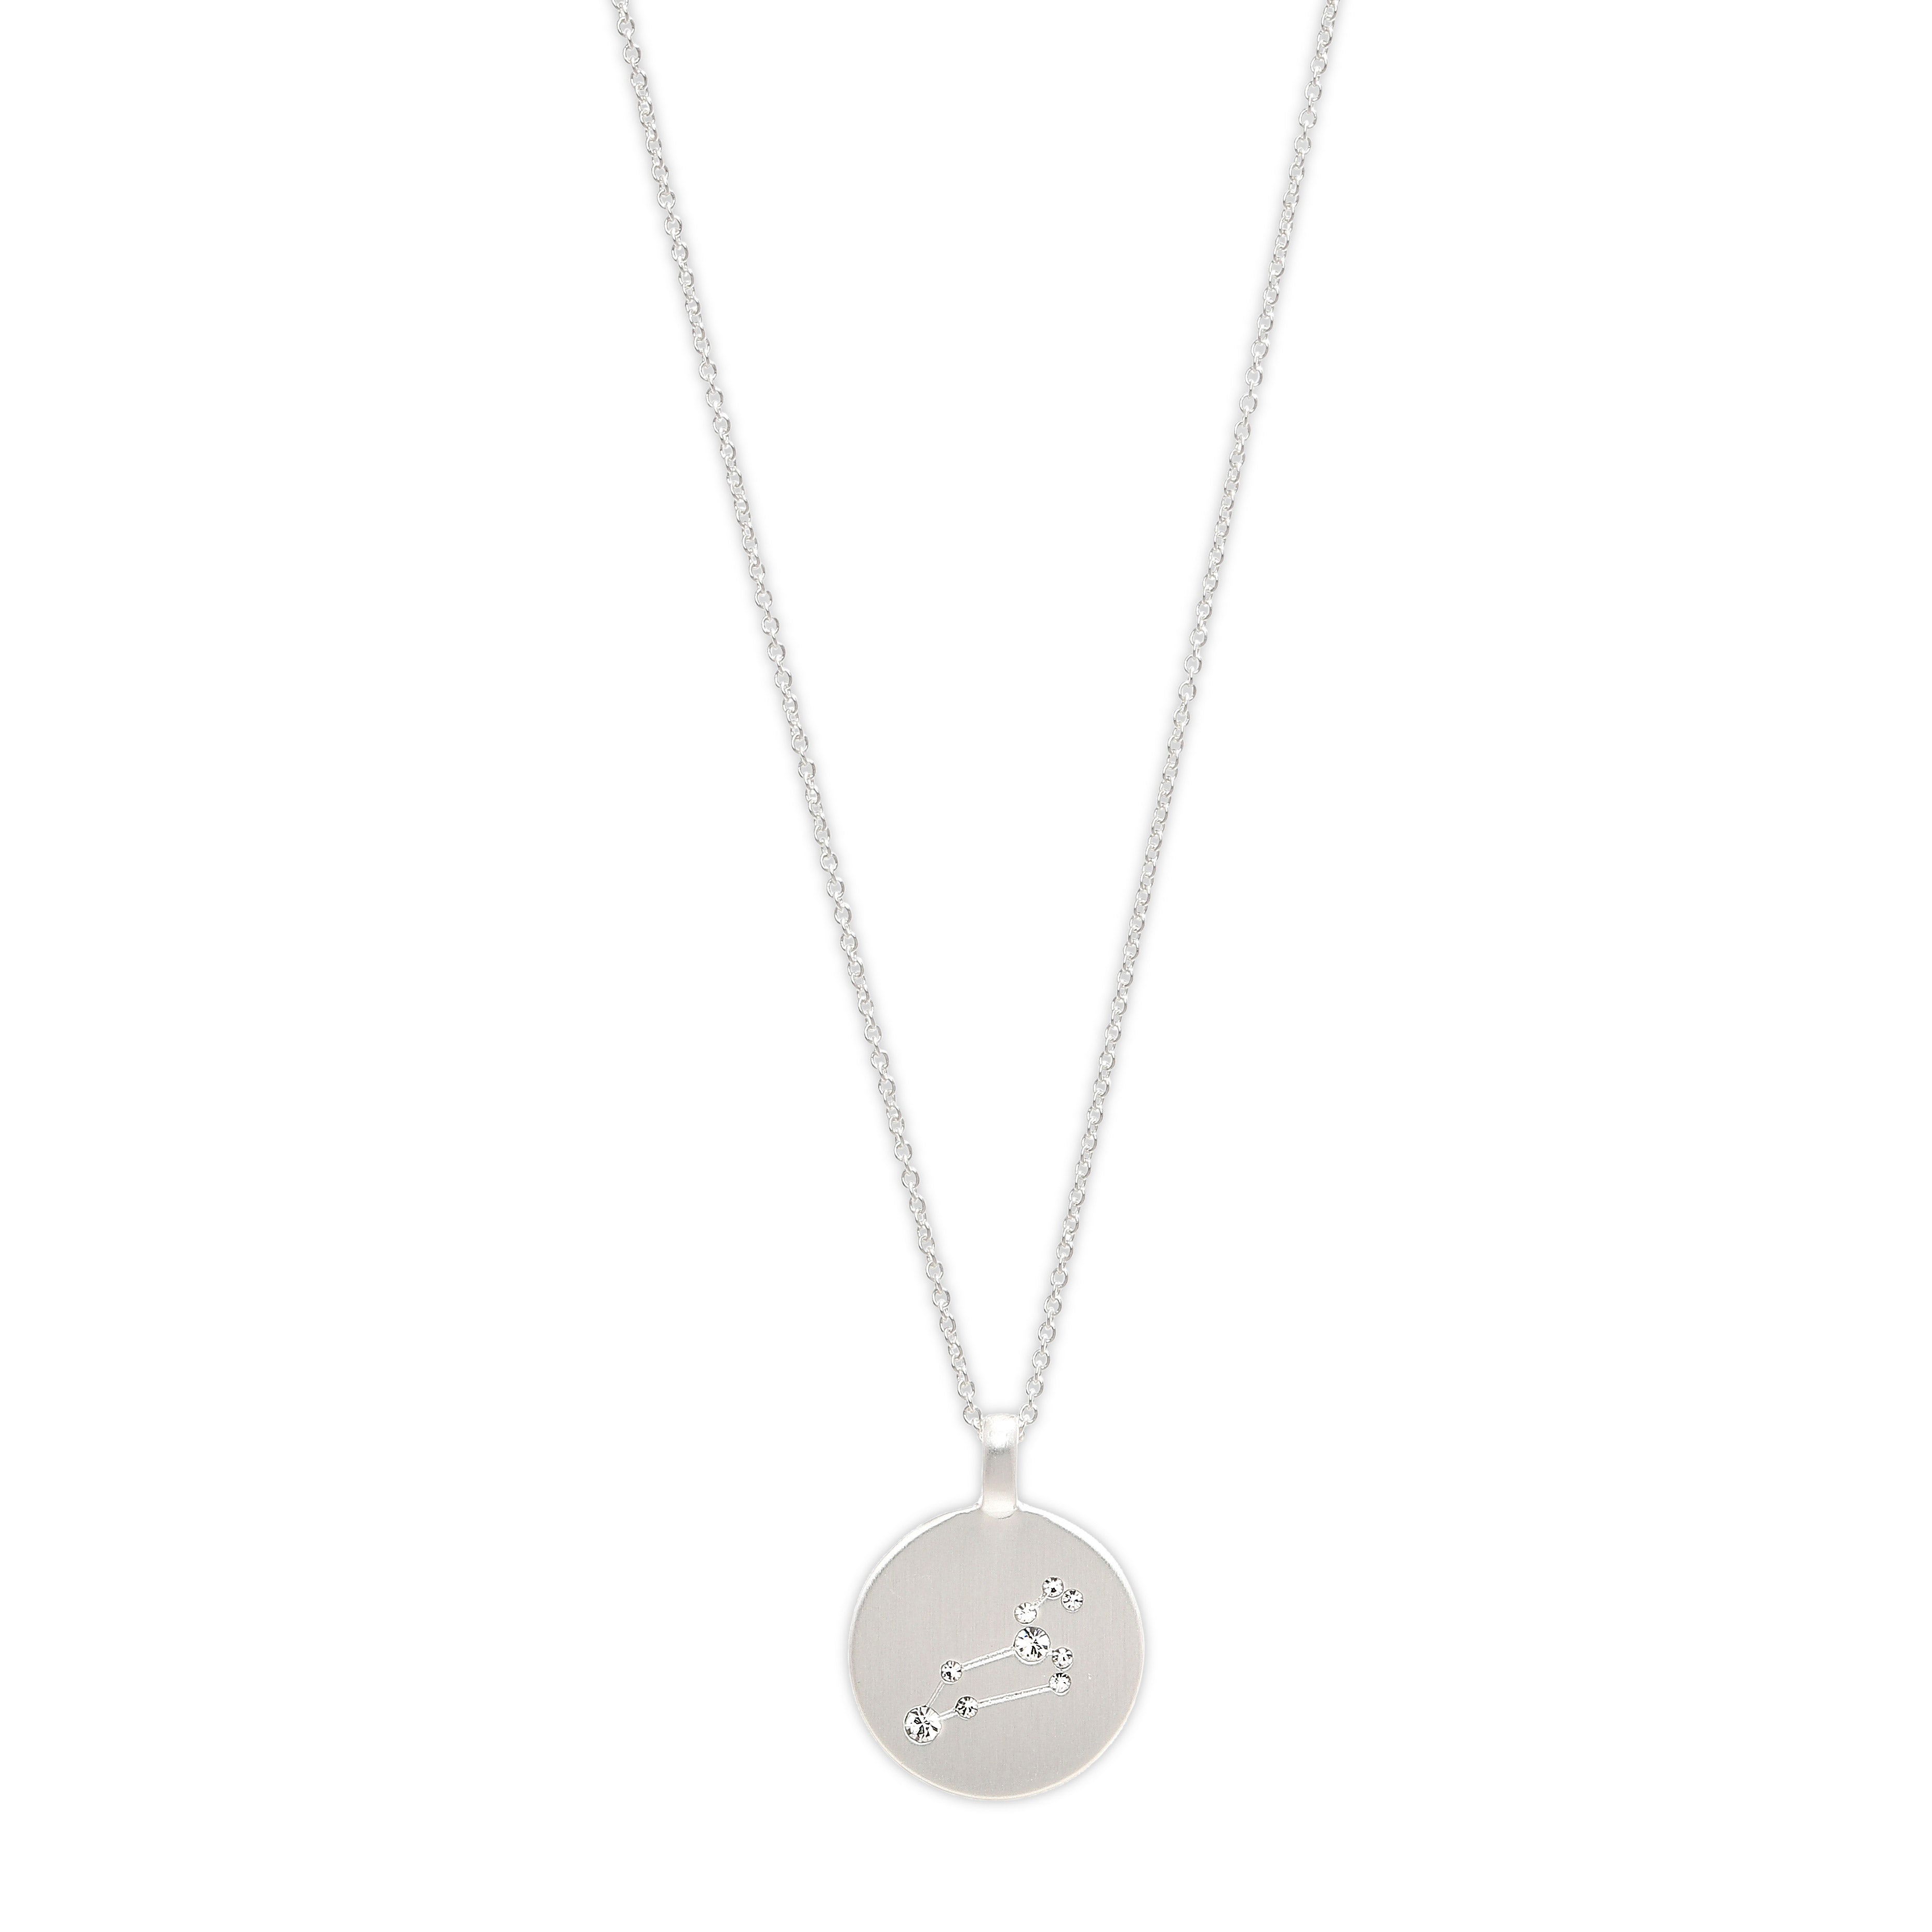 LEO Zodiac Sign Coin Necklace, silver-plated – Pilgrim